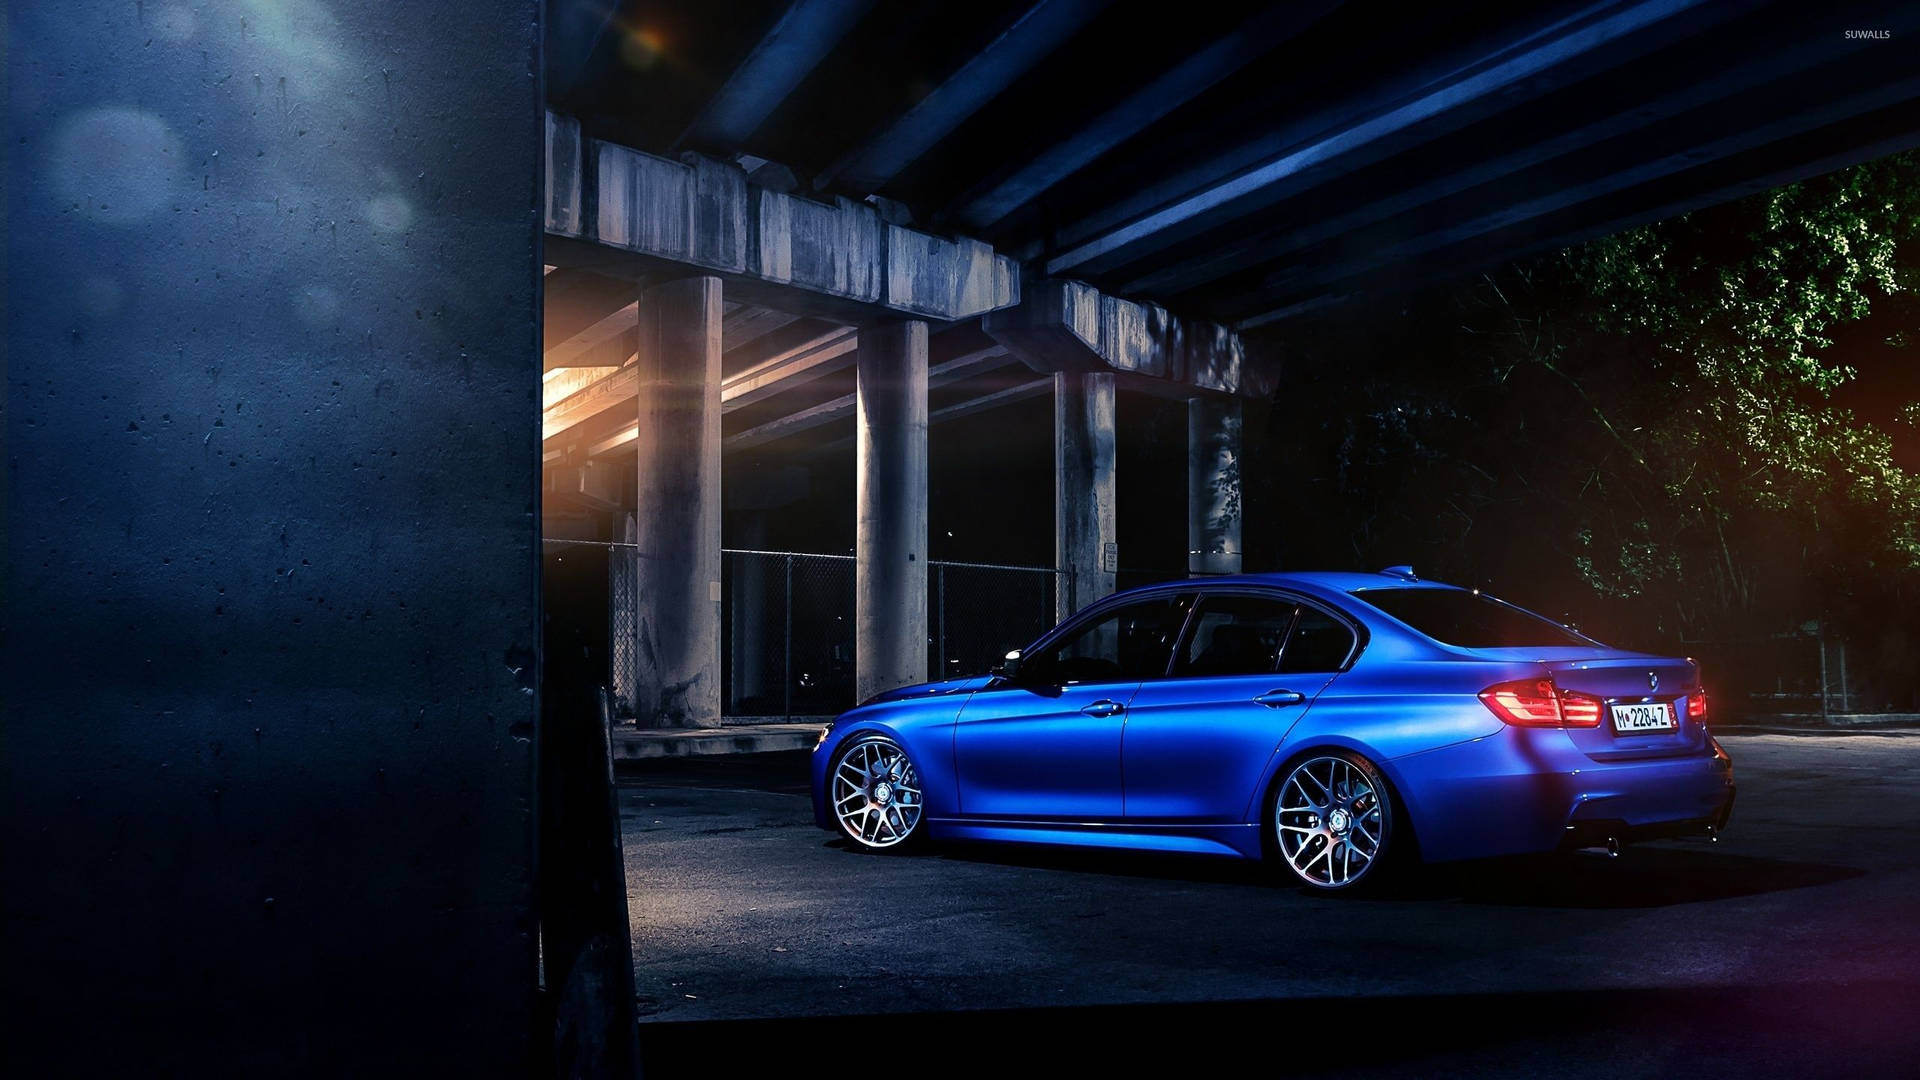 Feel the wind in your hair with the sleek BMW 3 Series Wallpaper